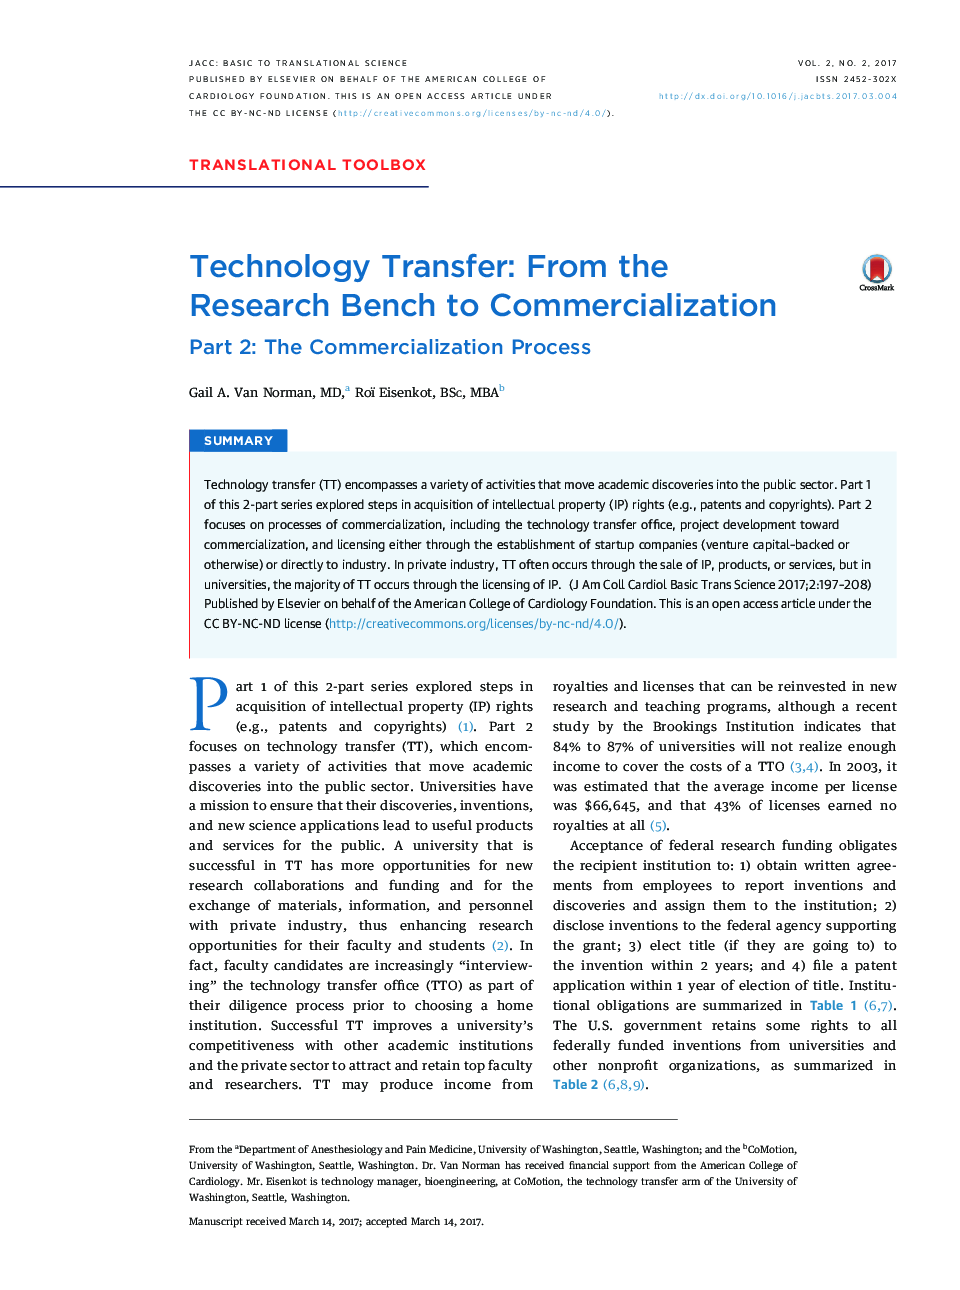 Technology Transfer: From the ResearchÂ Bench to Commercialization